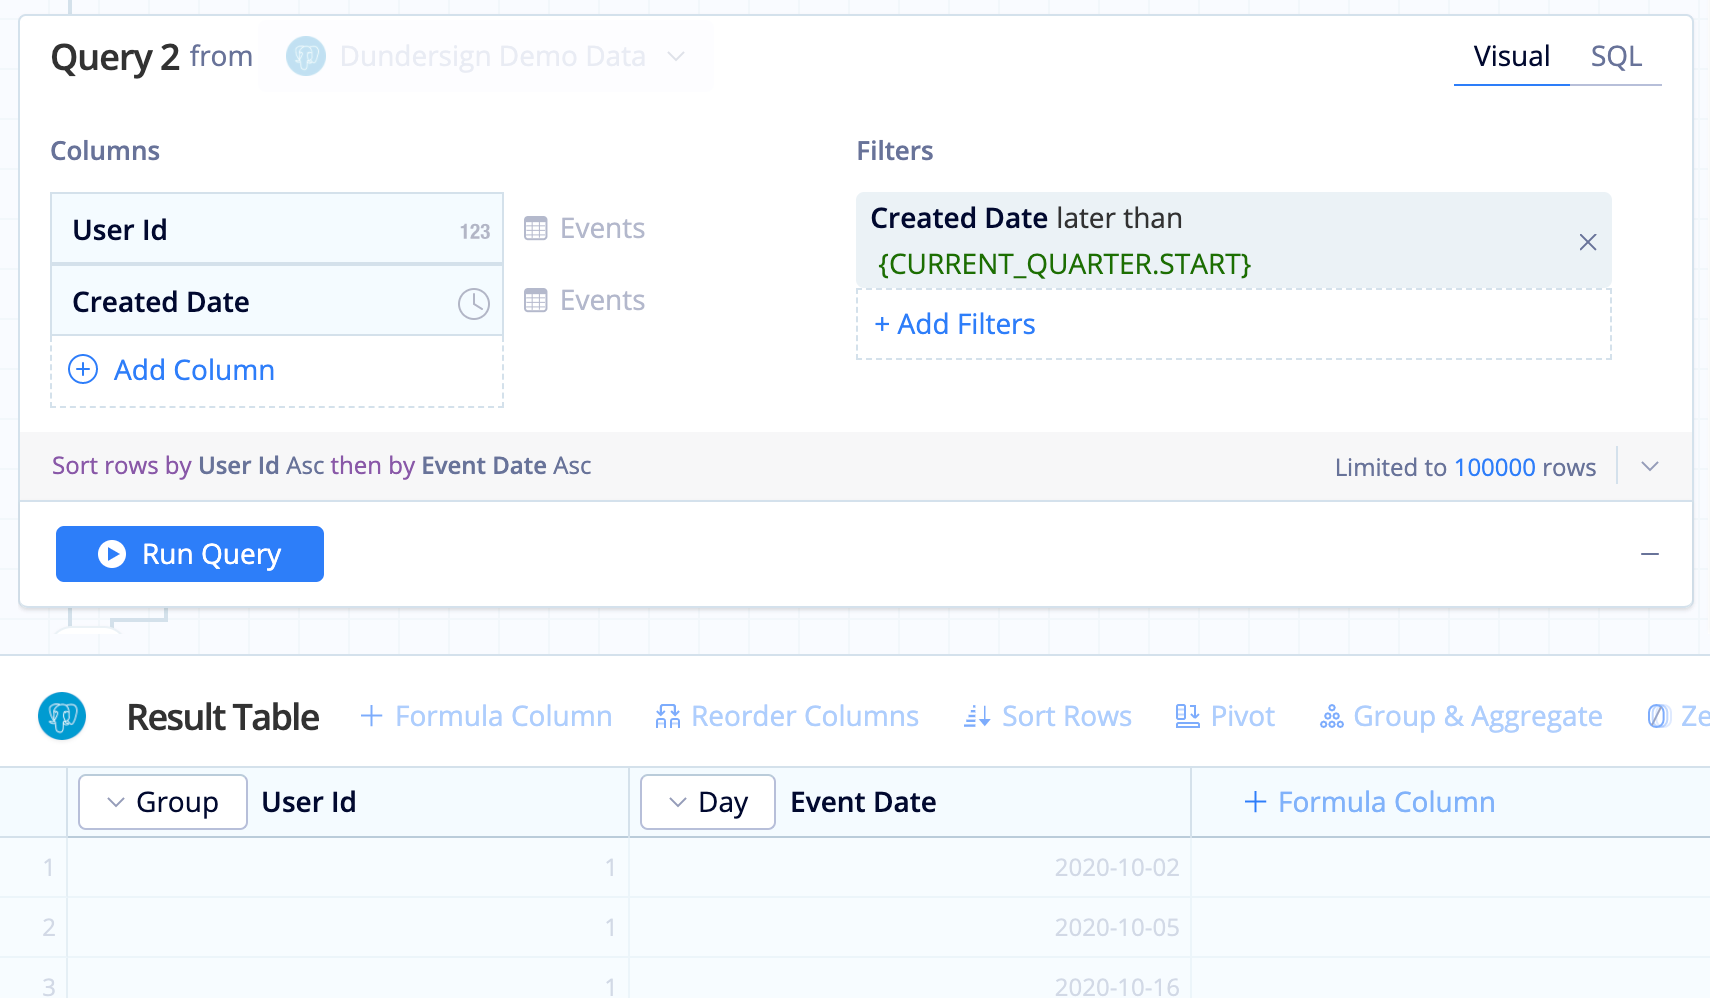 Pull the date of each event performed and the corresponding user